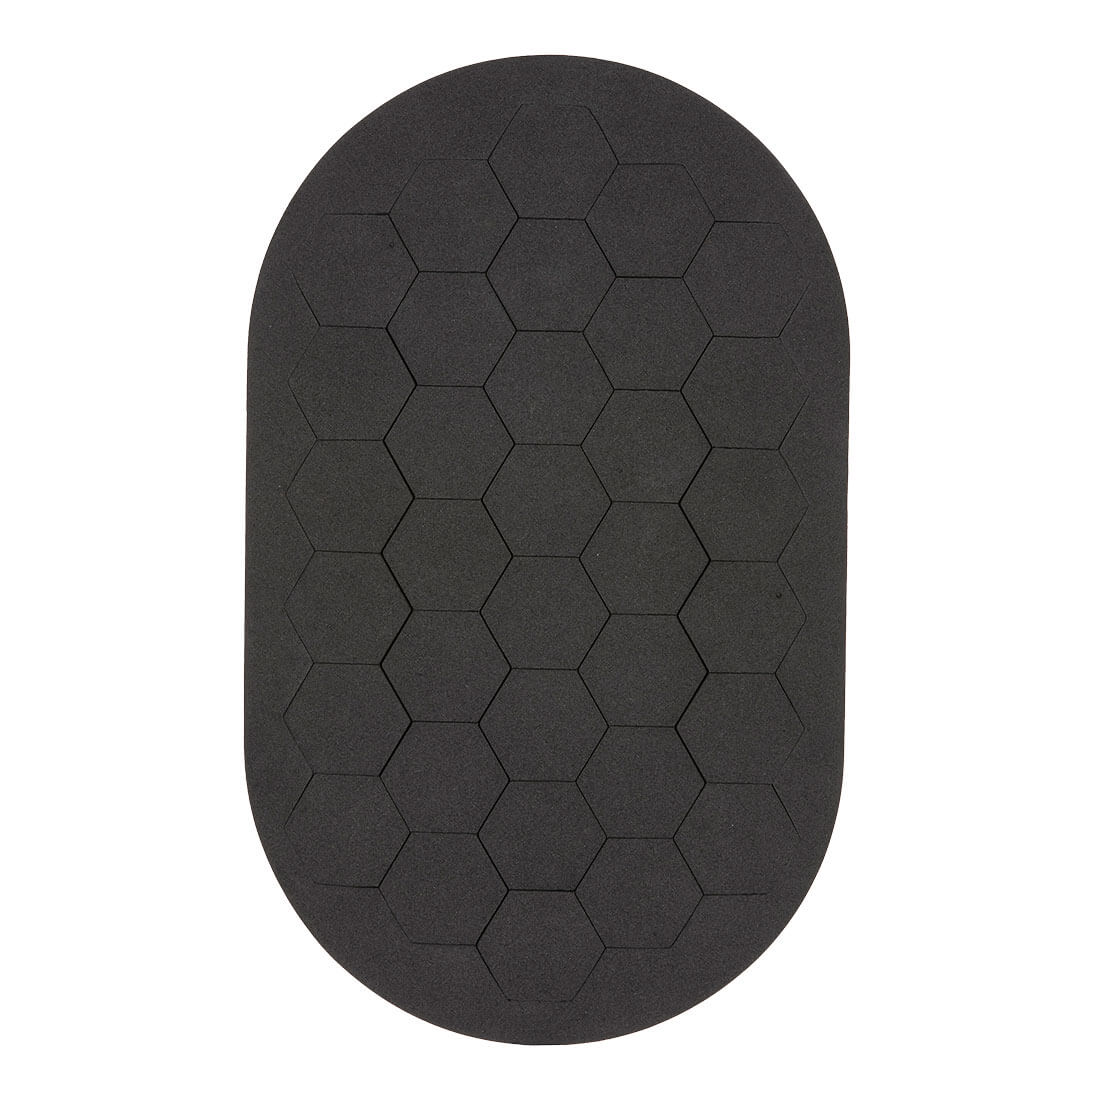 Portwest  KP33 - Flexible 3 Layer Knee Pad Inserts